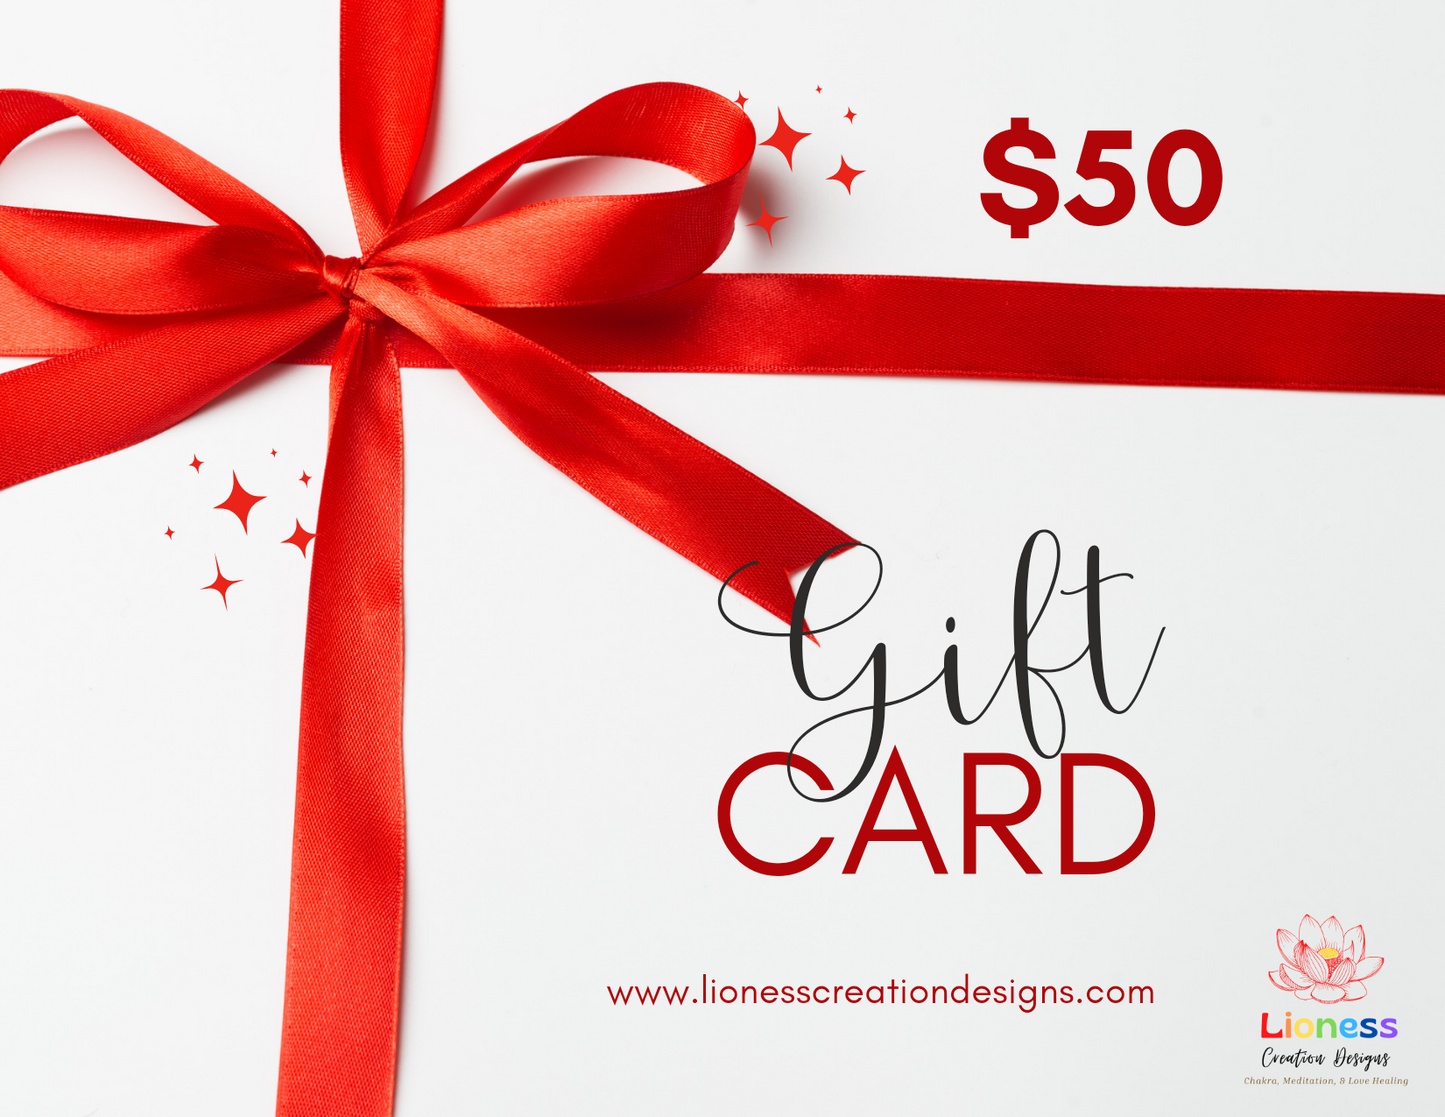 Lioness Creation Designs Gift Cards!